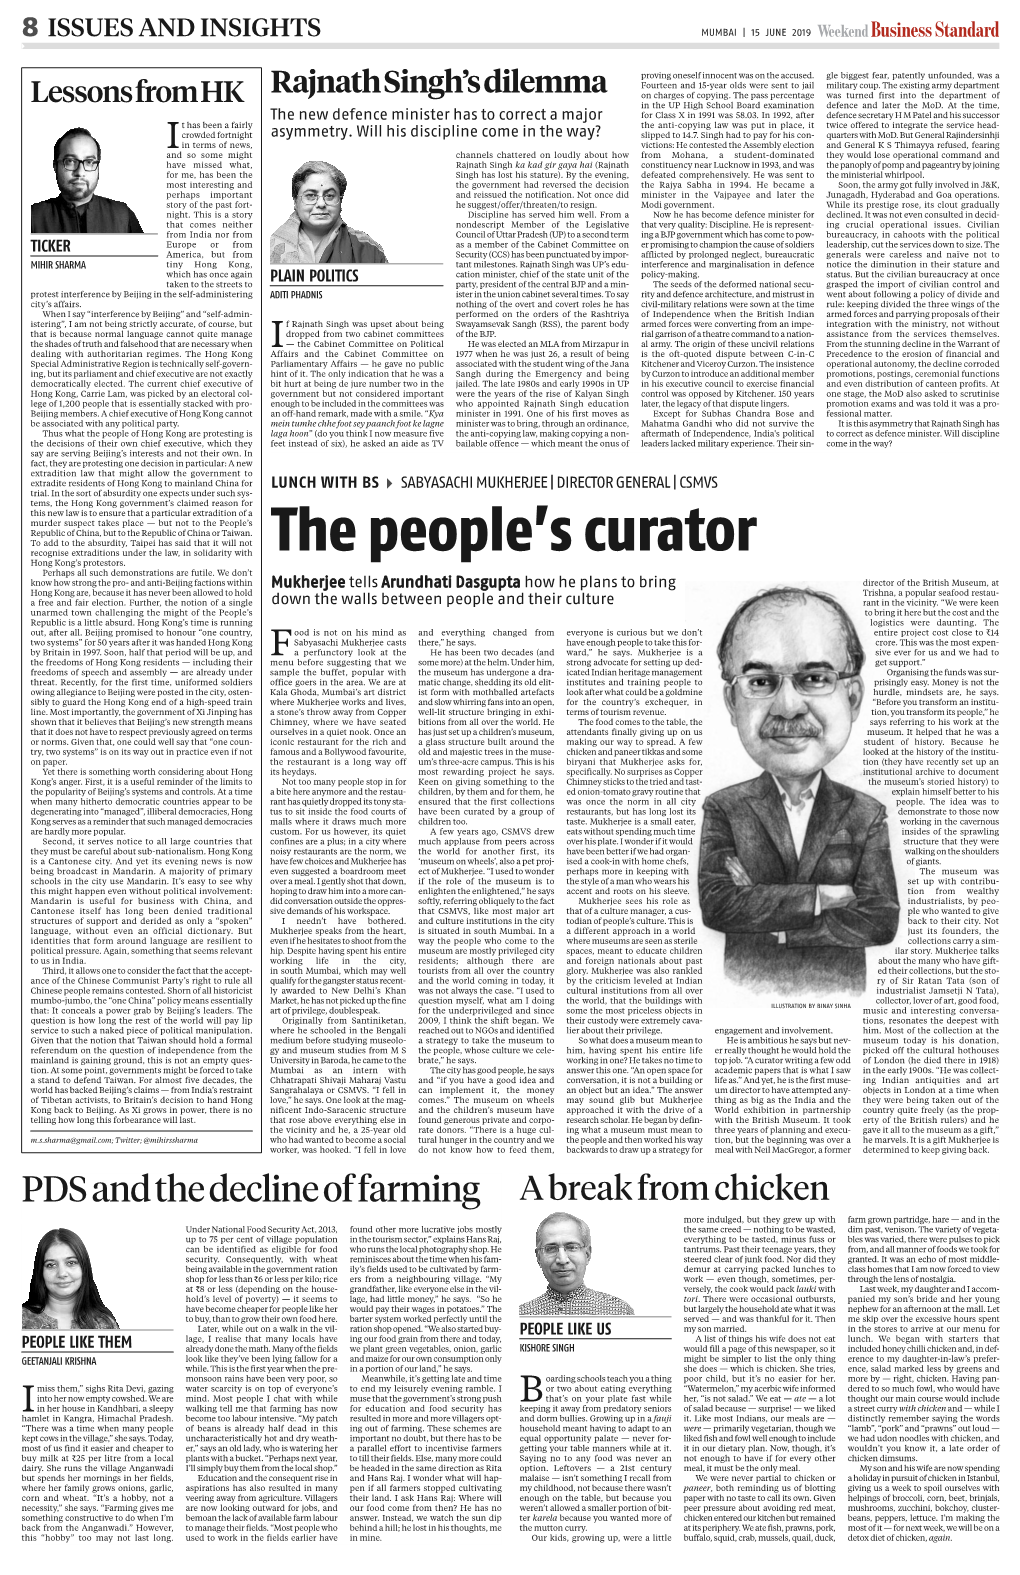 The People's Curator